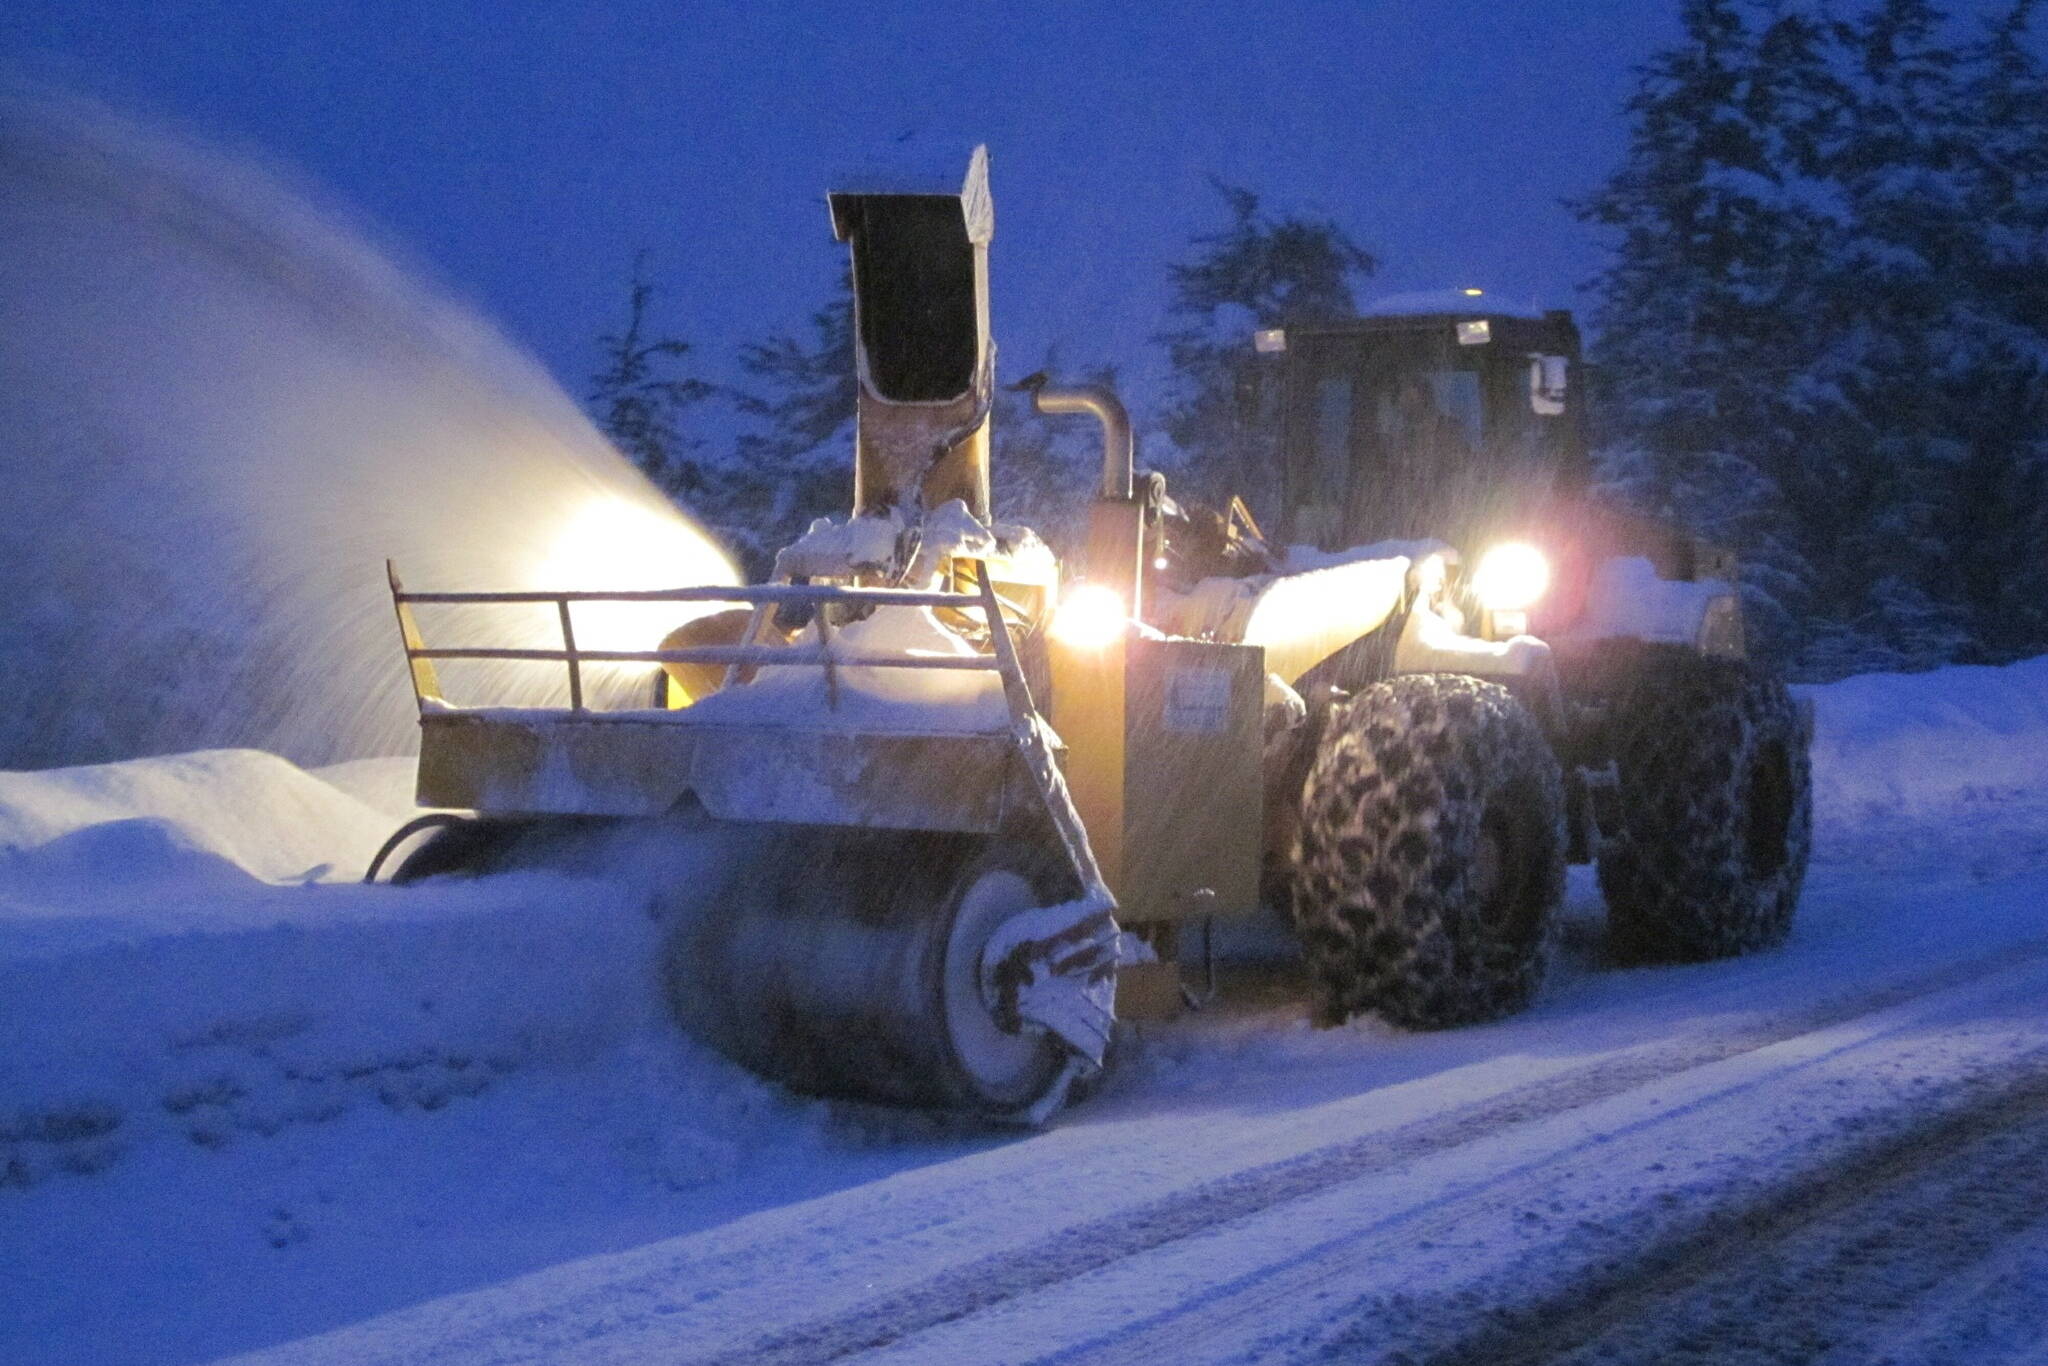 A plow clears snow from city streets on Sunday. (City and Borough of Juneau photo)